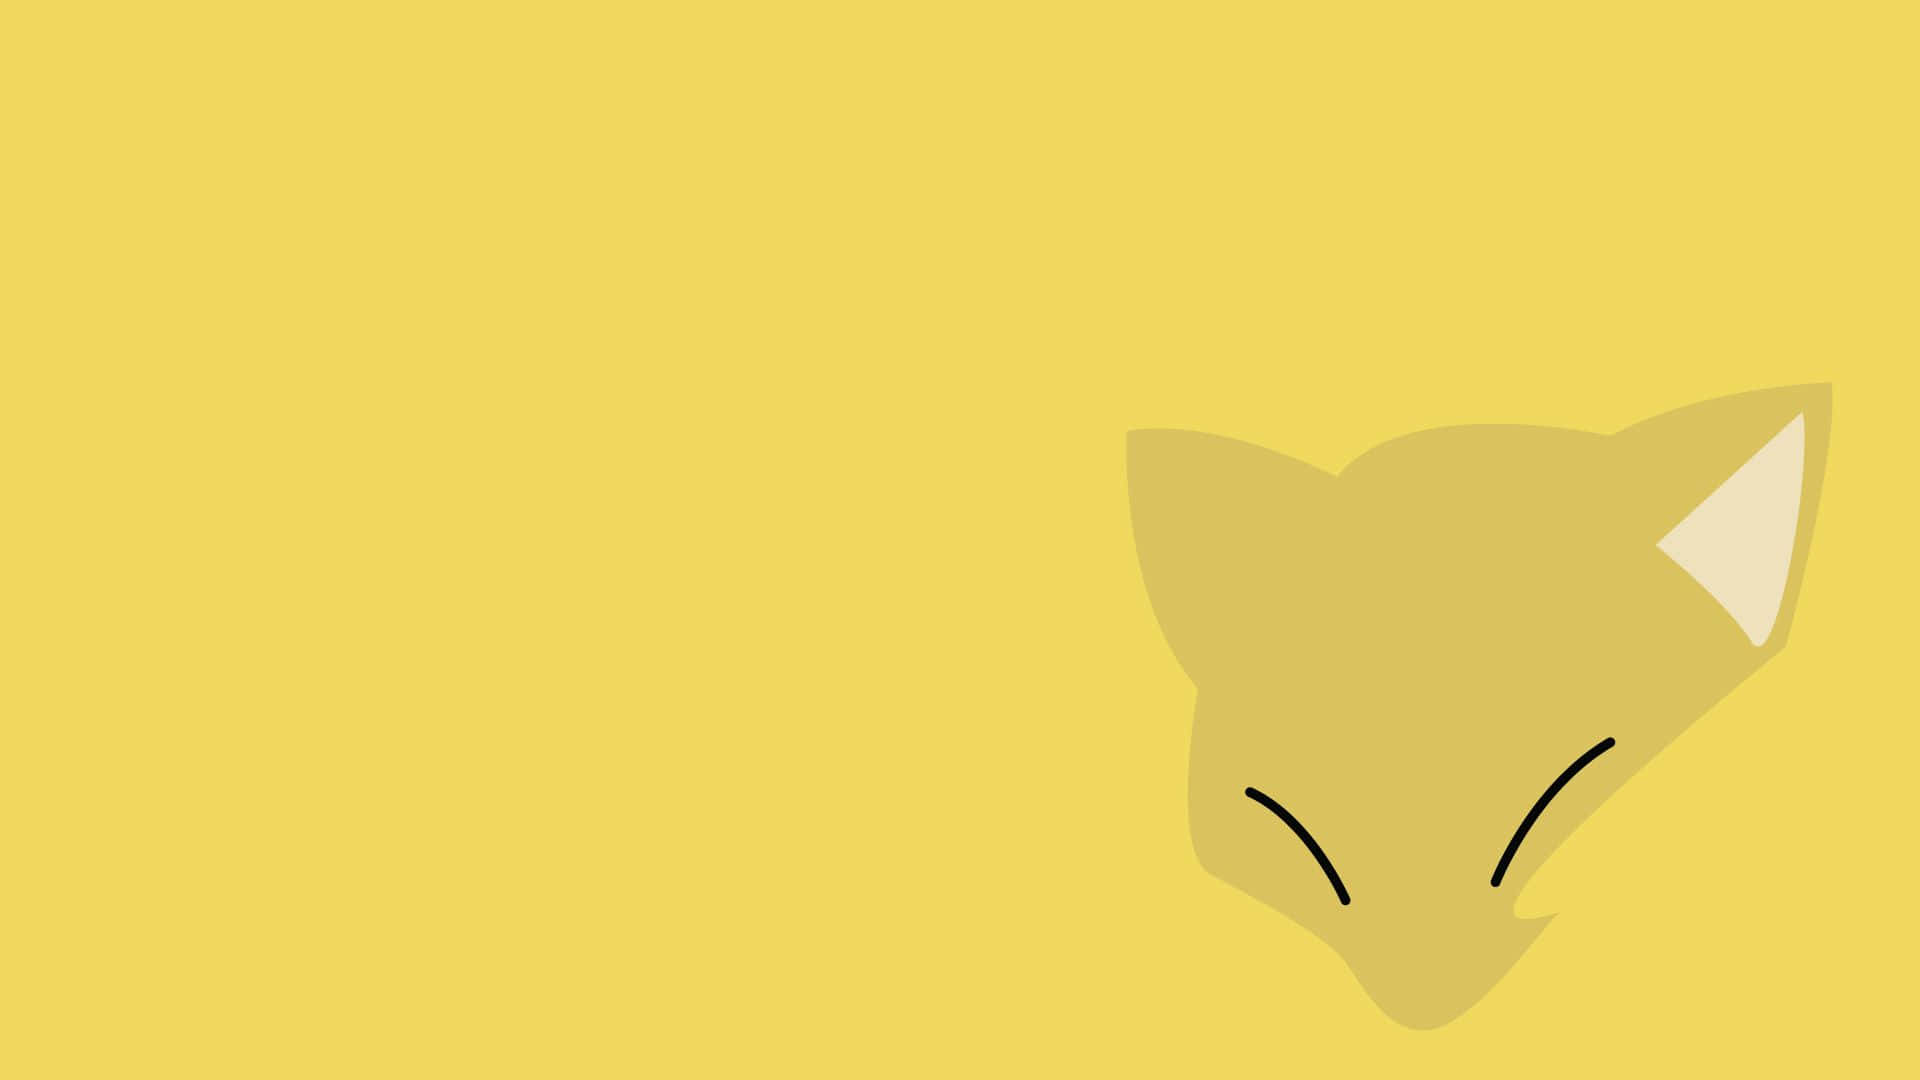 A Yellow Fox With Its Eyes Closed On A Yellow Background Wallpaper